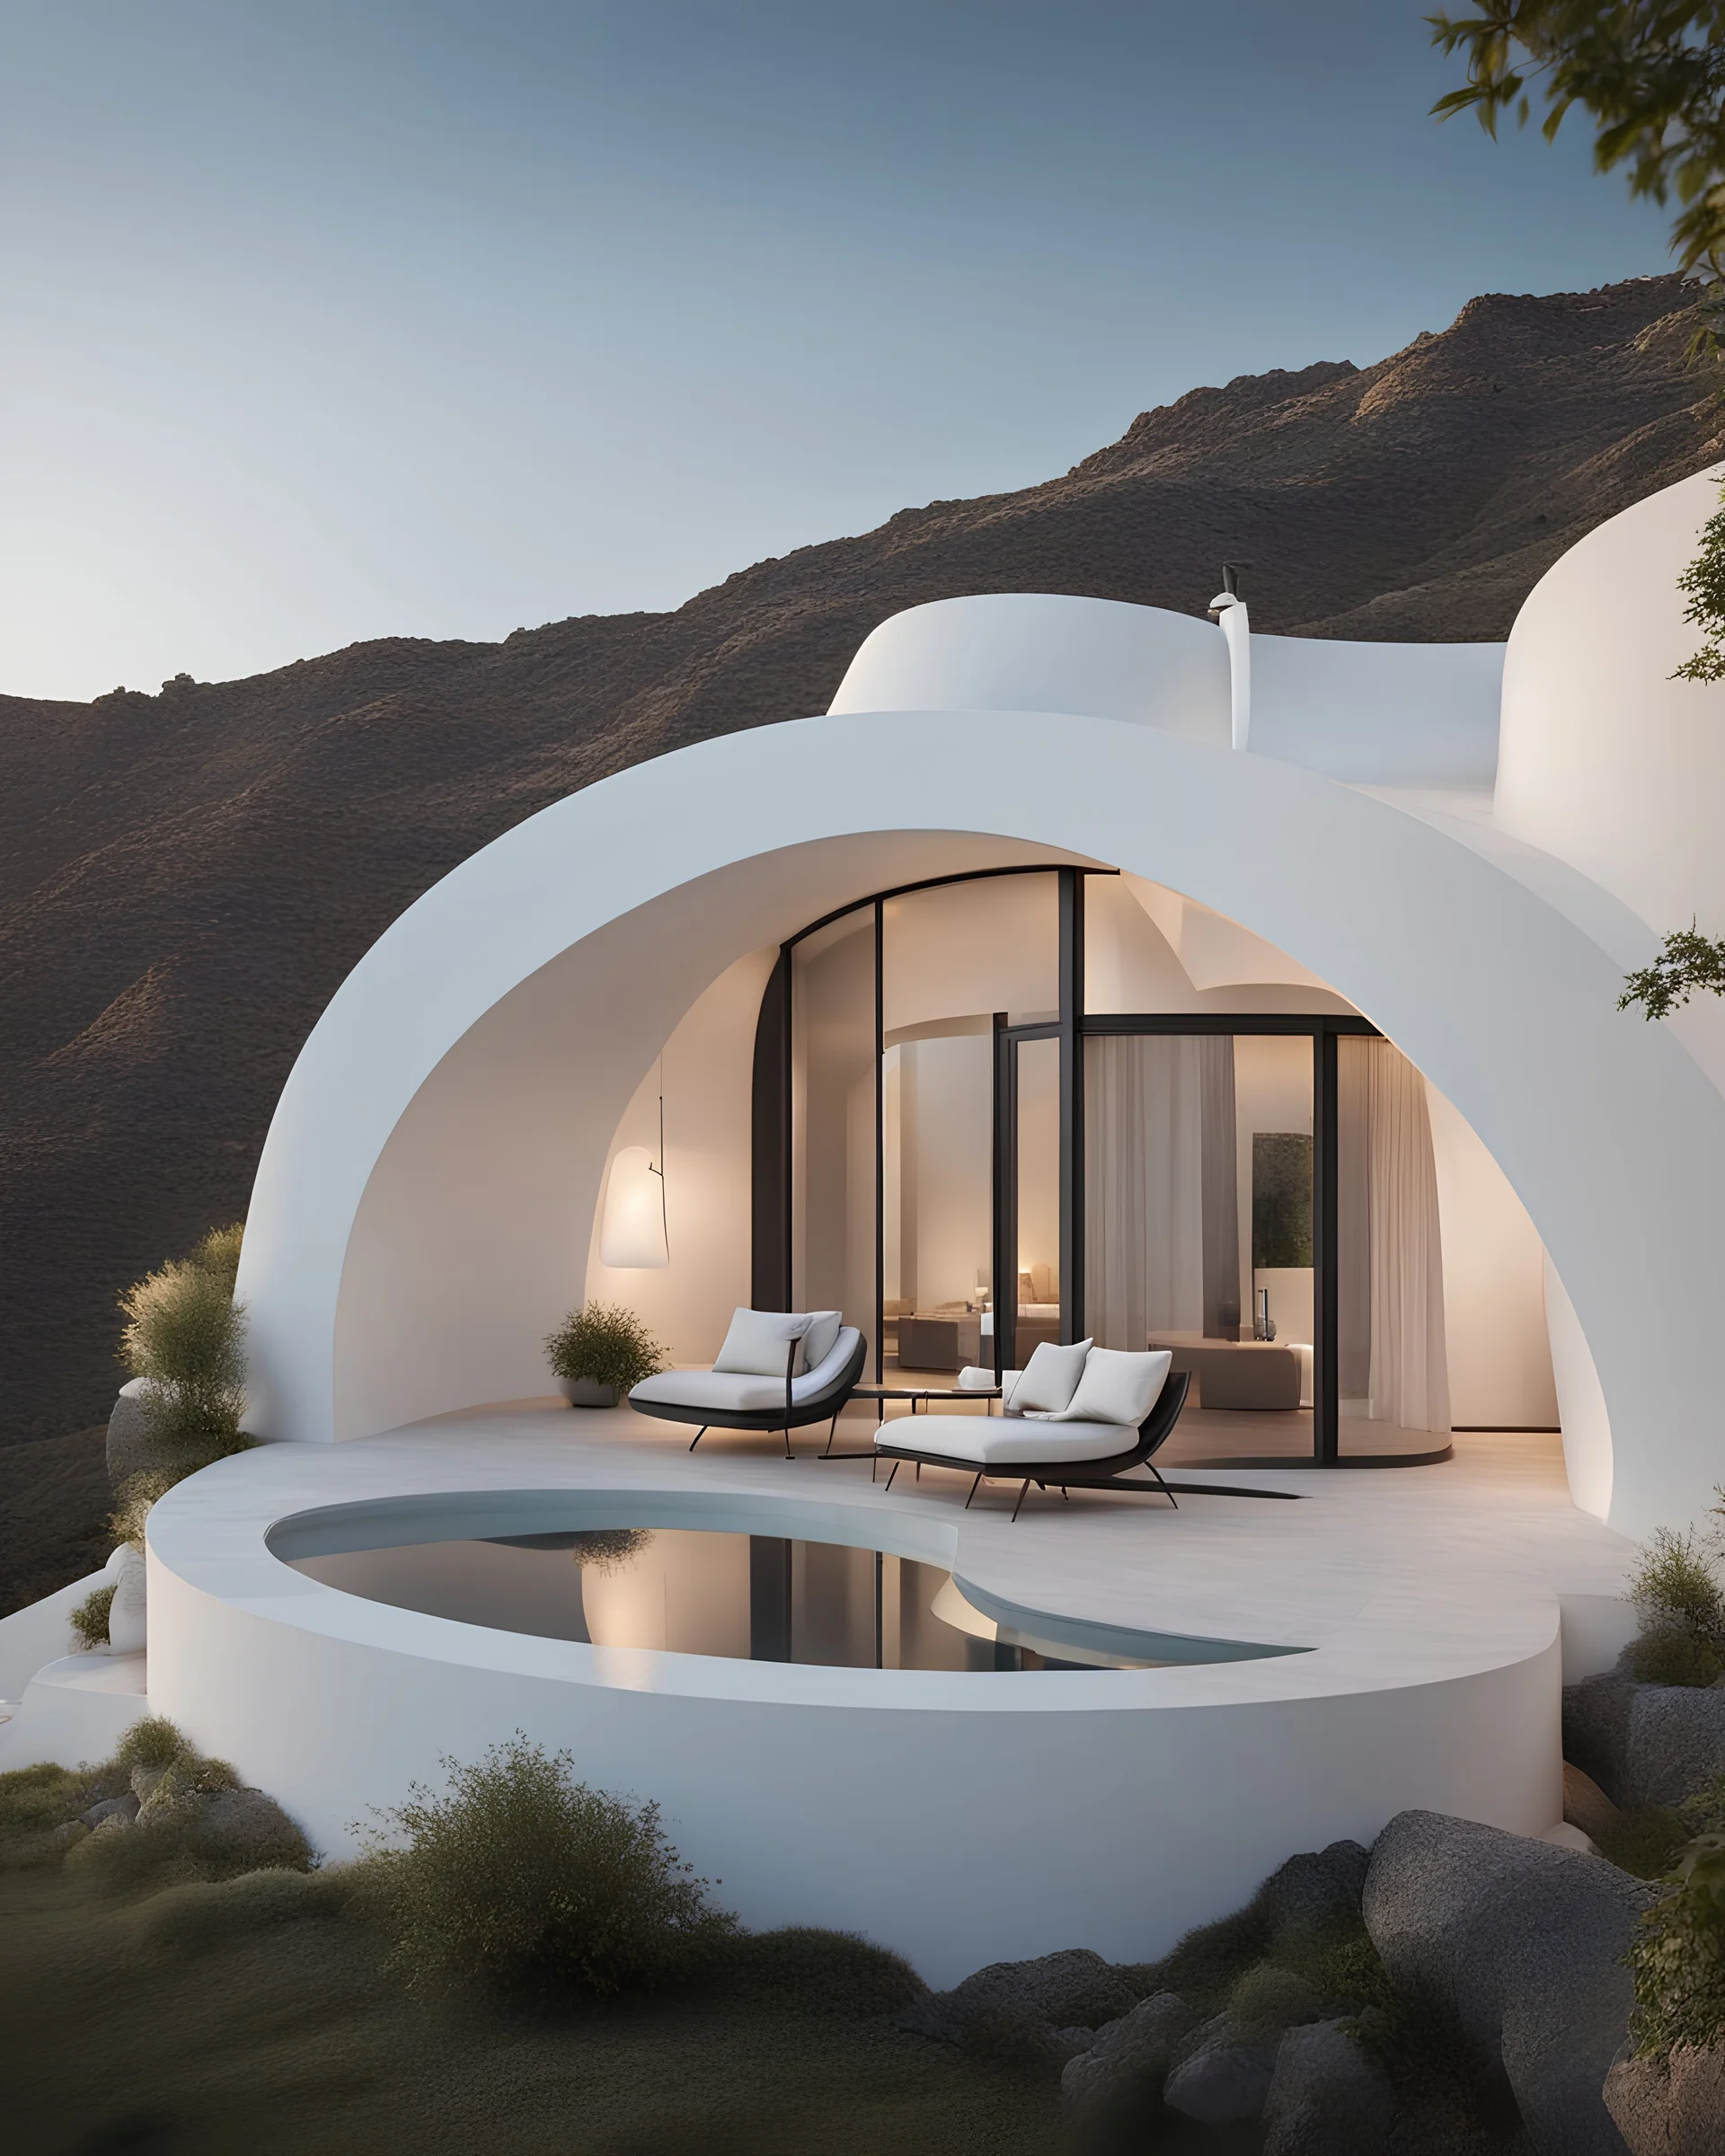 a modern minimalist curve exterior villa with arc windows and, inspired by santorini